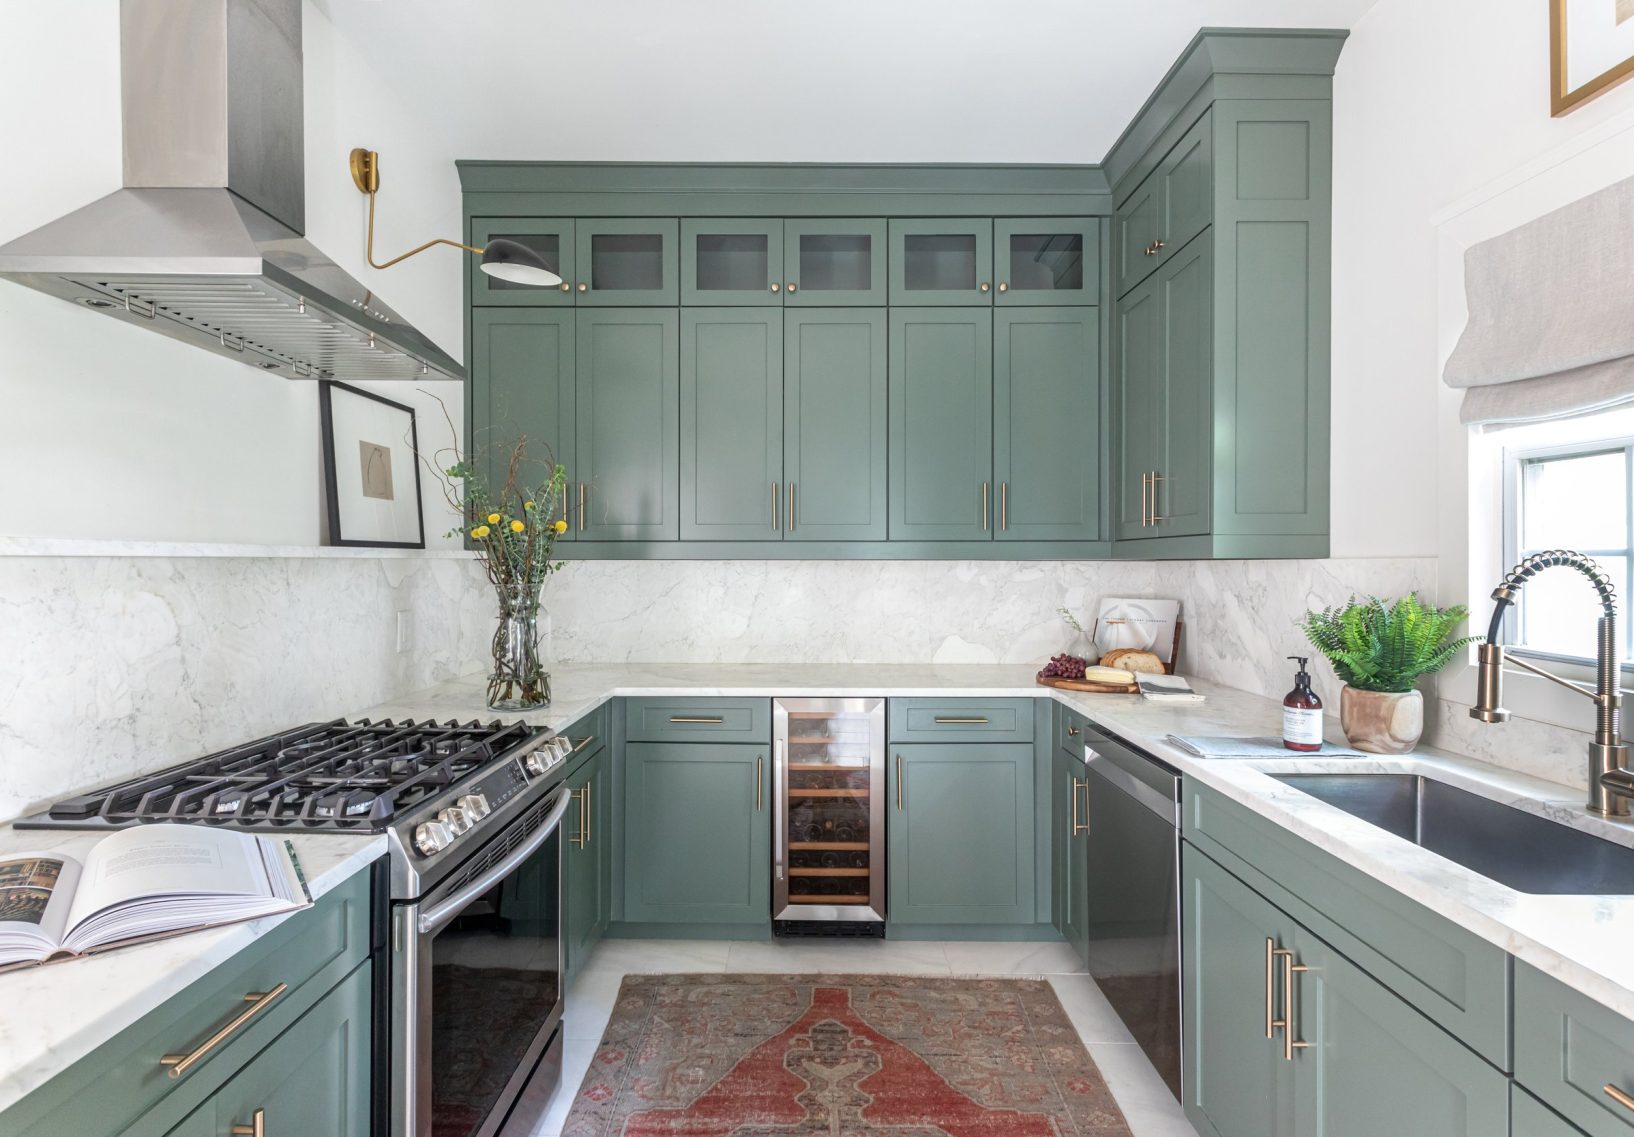 Kitchen with light green cabinets and oven range.